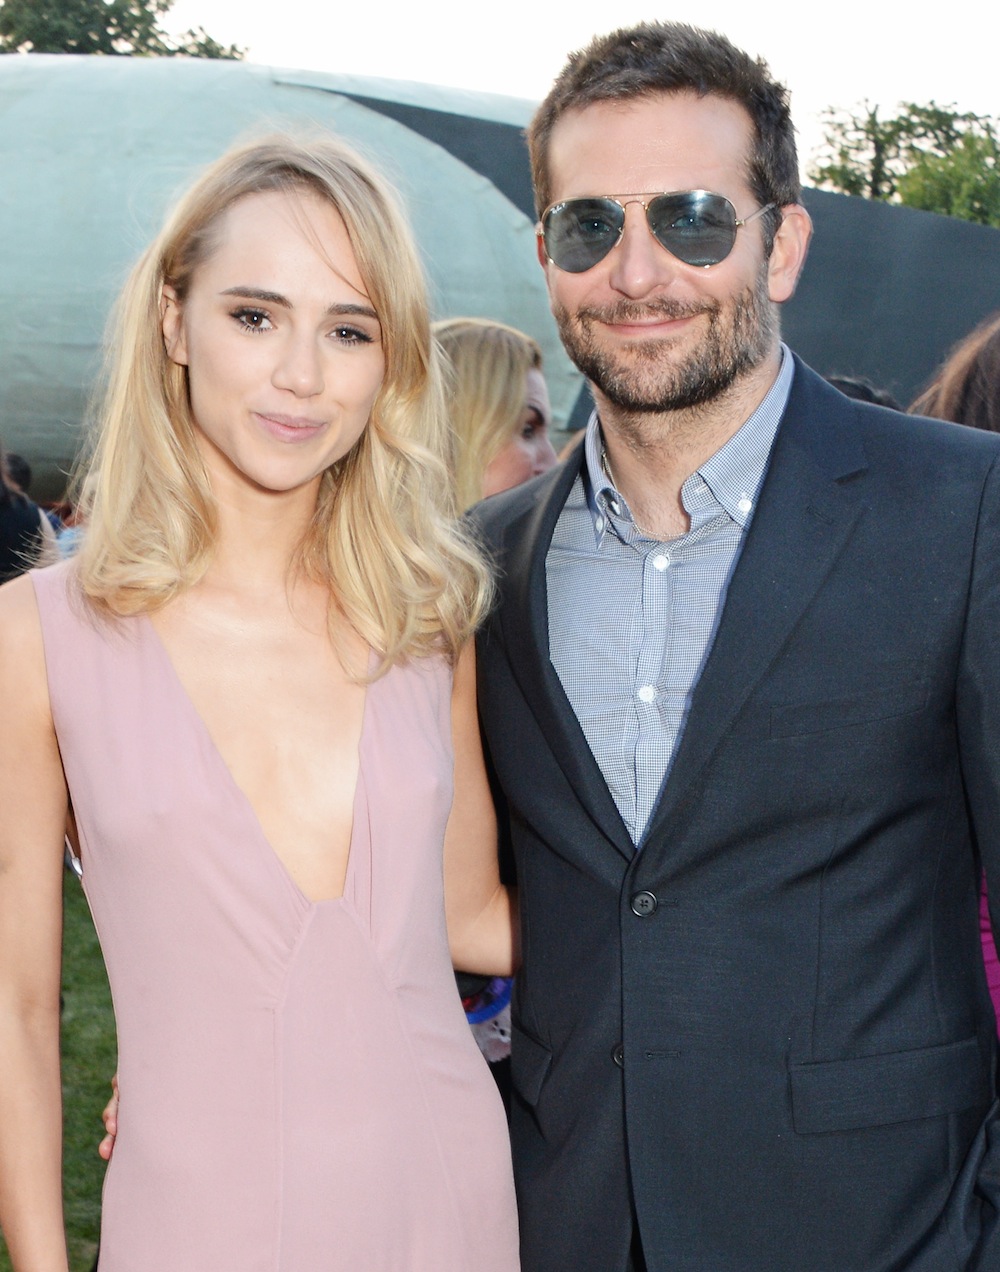 Bradley Cooper and Suki Waterhouse Move on After Breakup (REPORT)